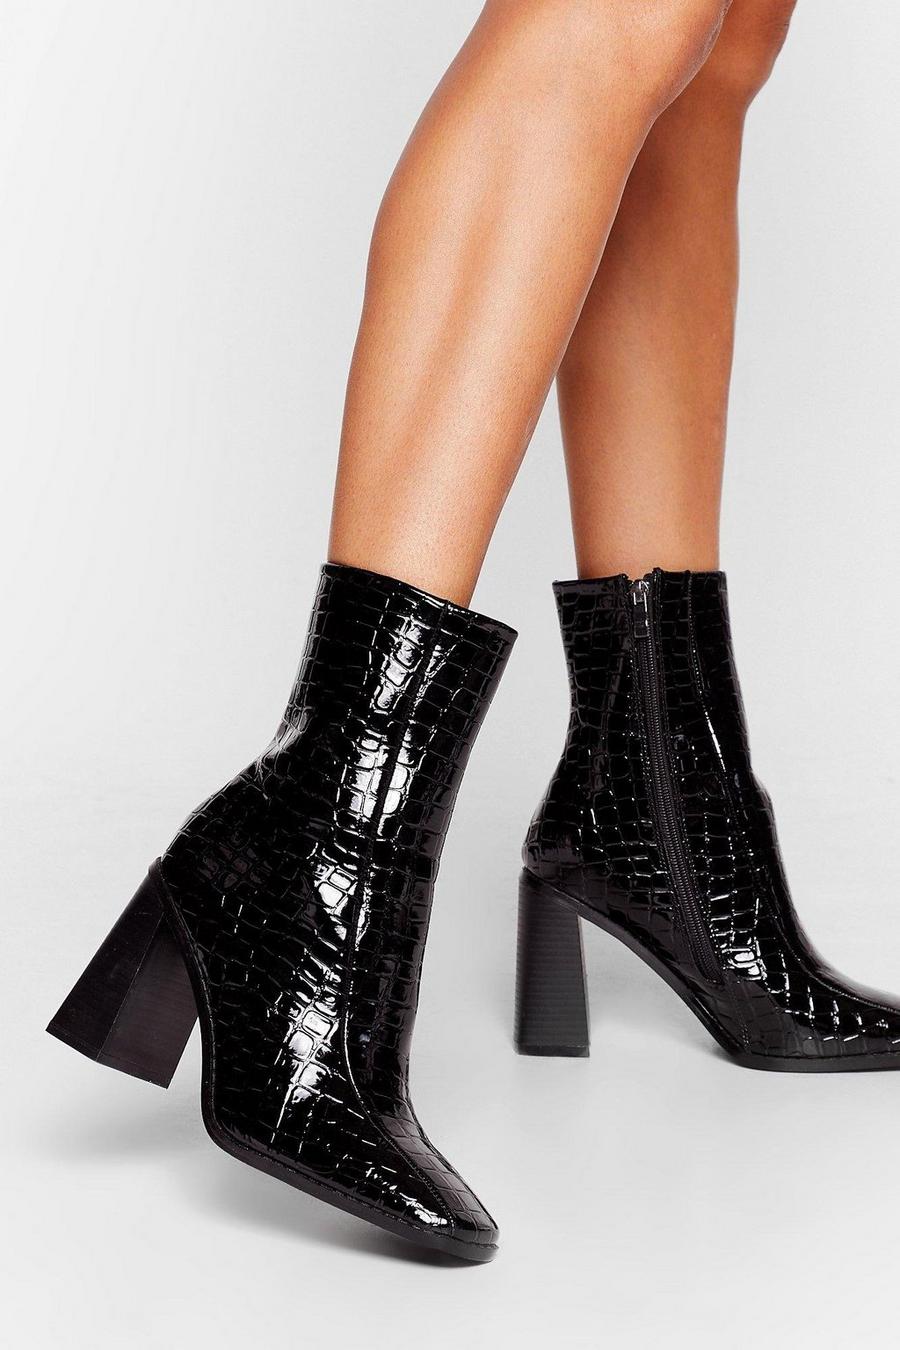 Black Taking Flare Of Business Croc Heeled Boots